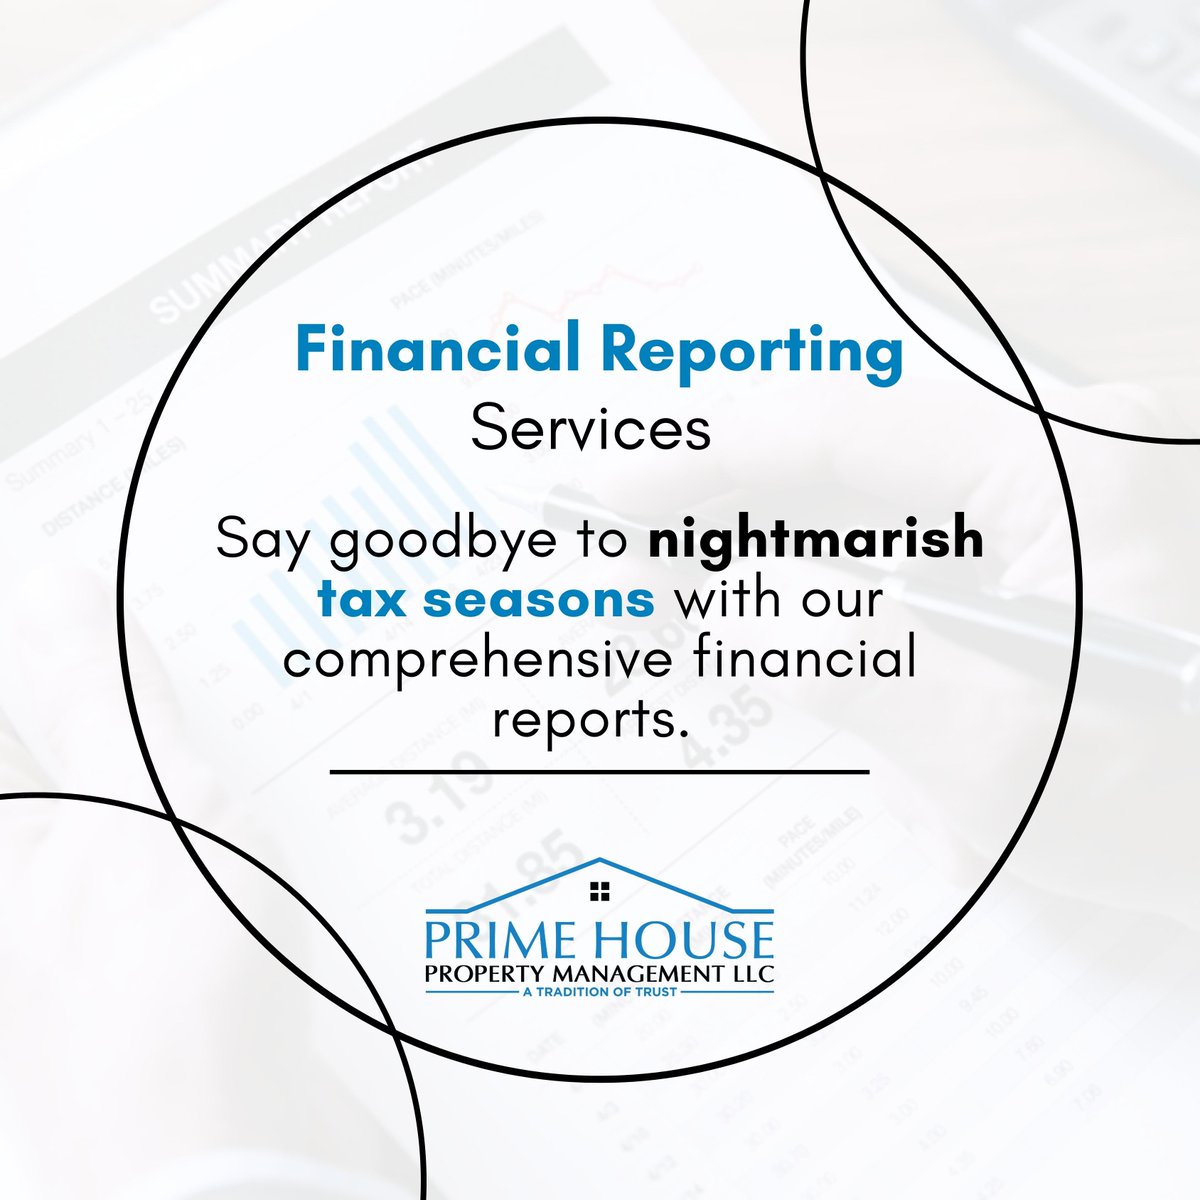 Say goodbye to nightmarish tax seasons with our comprehensive financial reports. We generate comprehensive statements for your review each month.
---
🌐 primehouseproperties.com
.
#primehousepropertymanagement #monthlyreport #monthly #taxes #financialstatements #financial